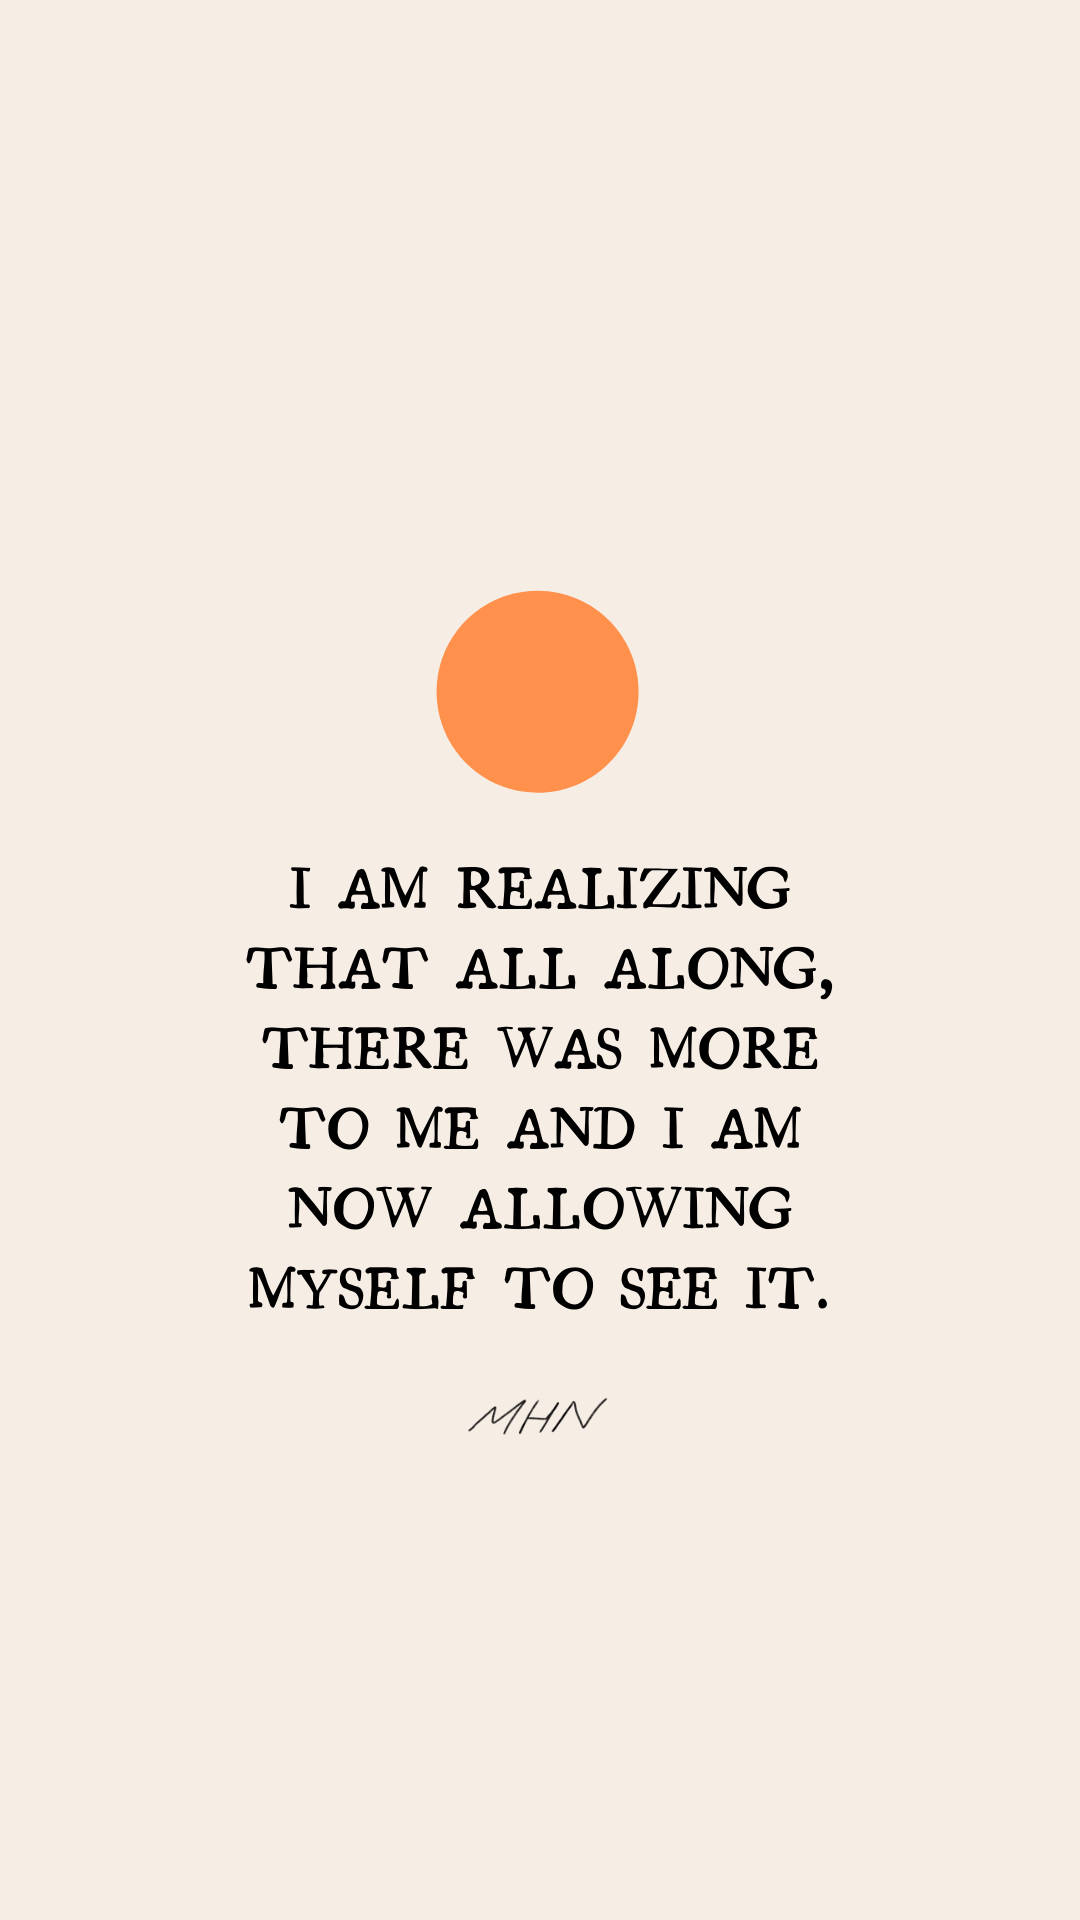 More To Me Affirmation Wallpaper